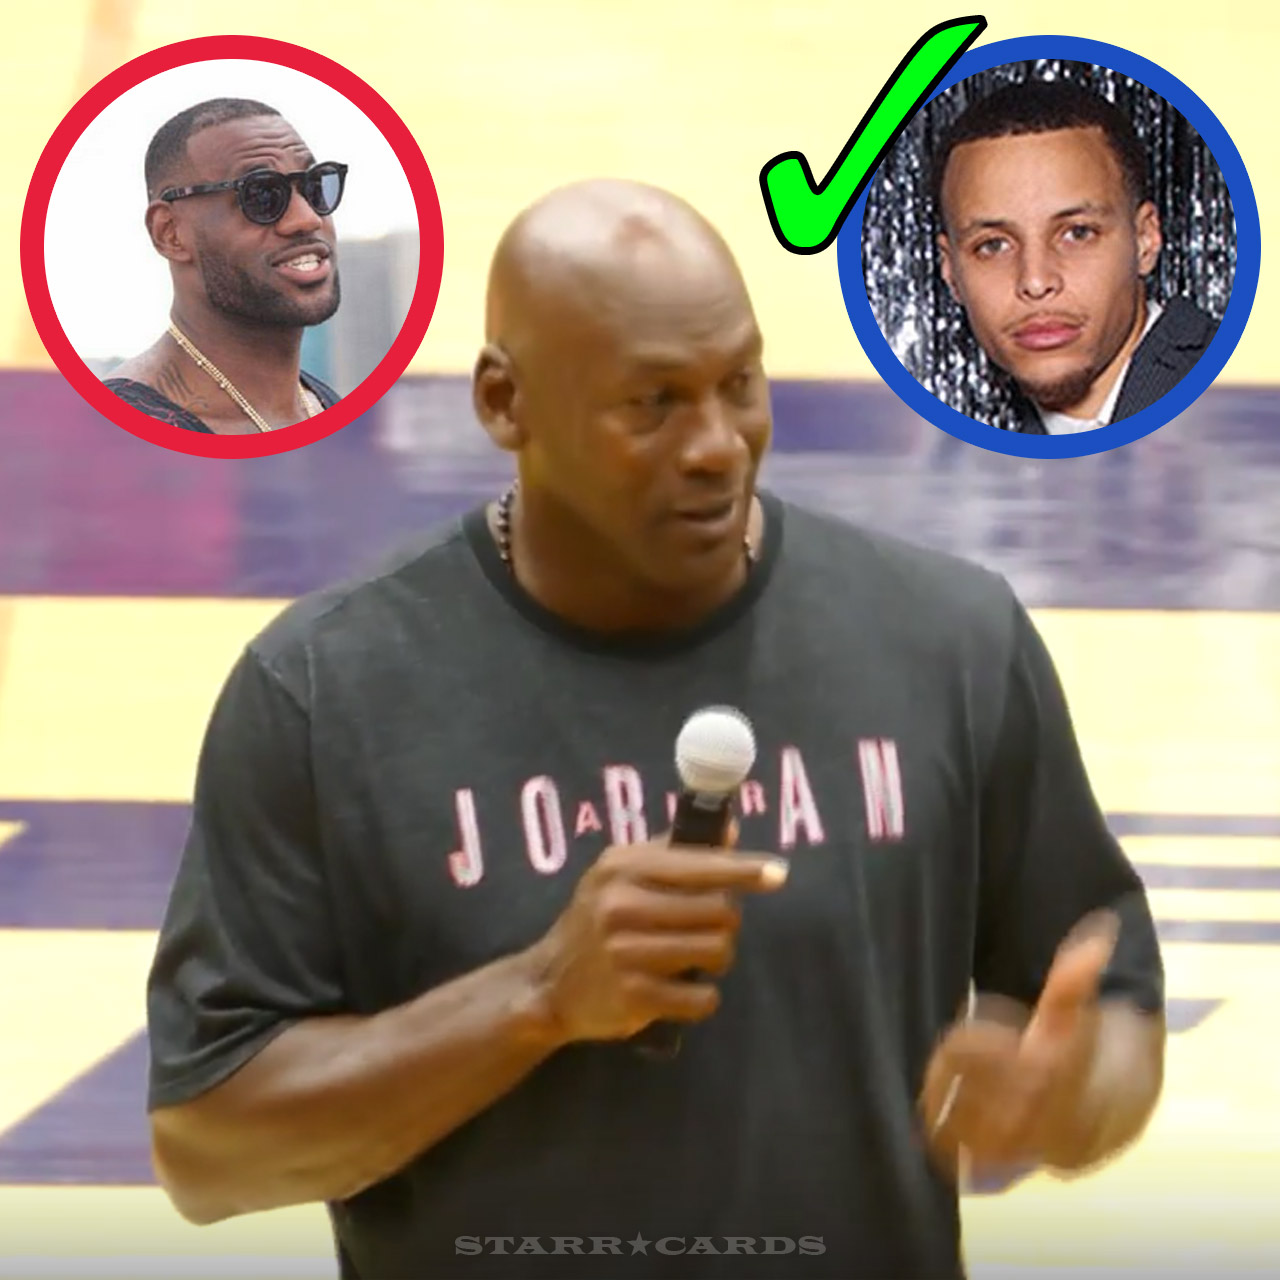 Michael Jordan opts for Steph Curry over LeBron James for hypothetical one-on-one game